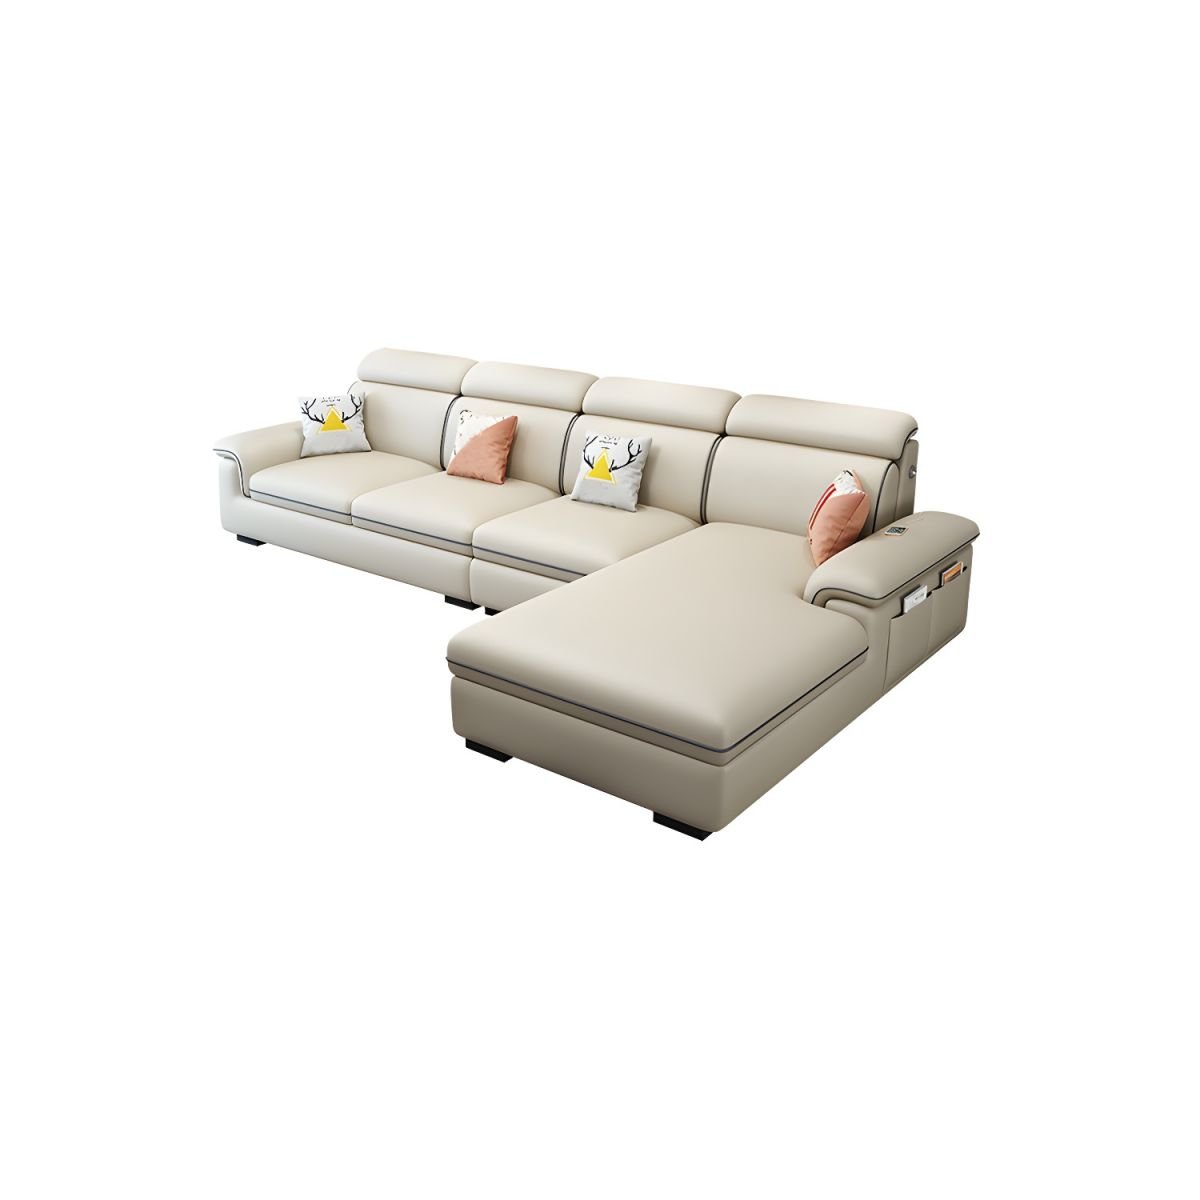 Wooden Modern 9 Feet L-Shape Sectionals No Distressing Seats 4 Storage Included Sofa Chaise - Tech Cloth Off-White Right